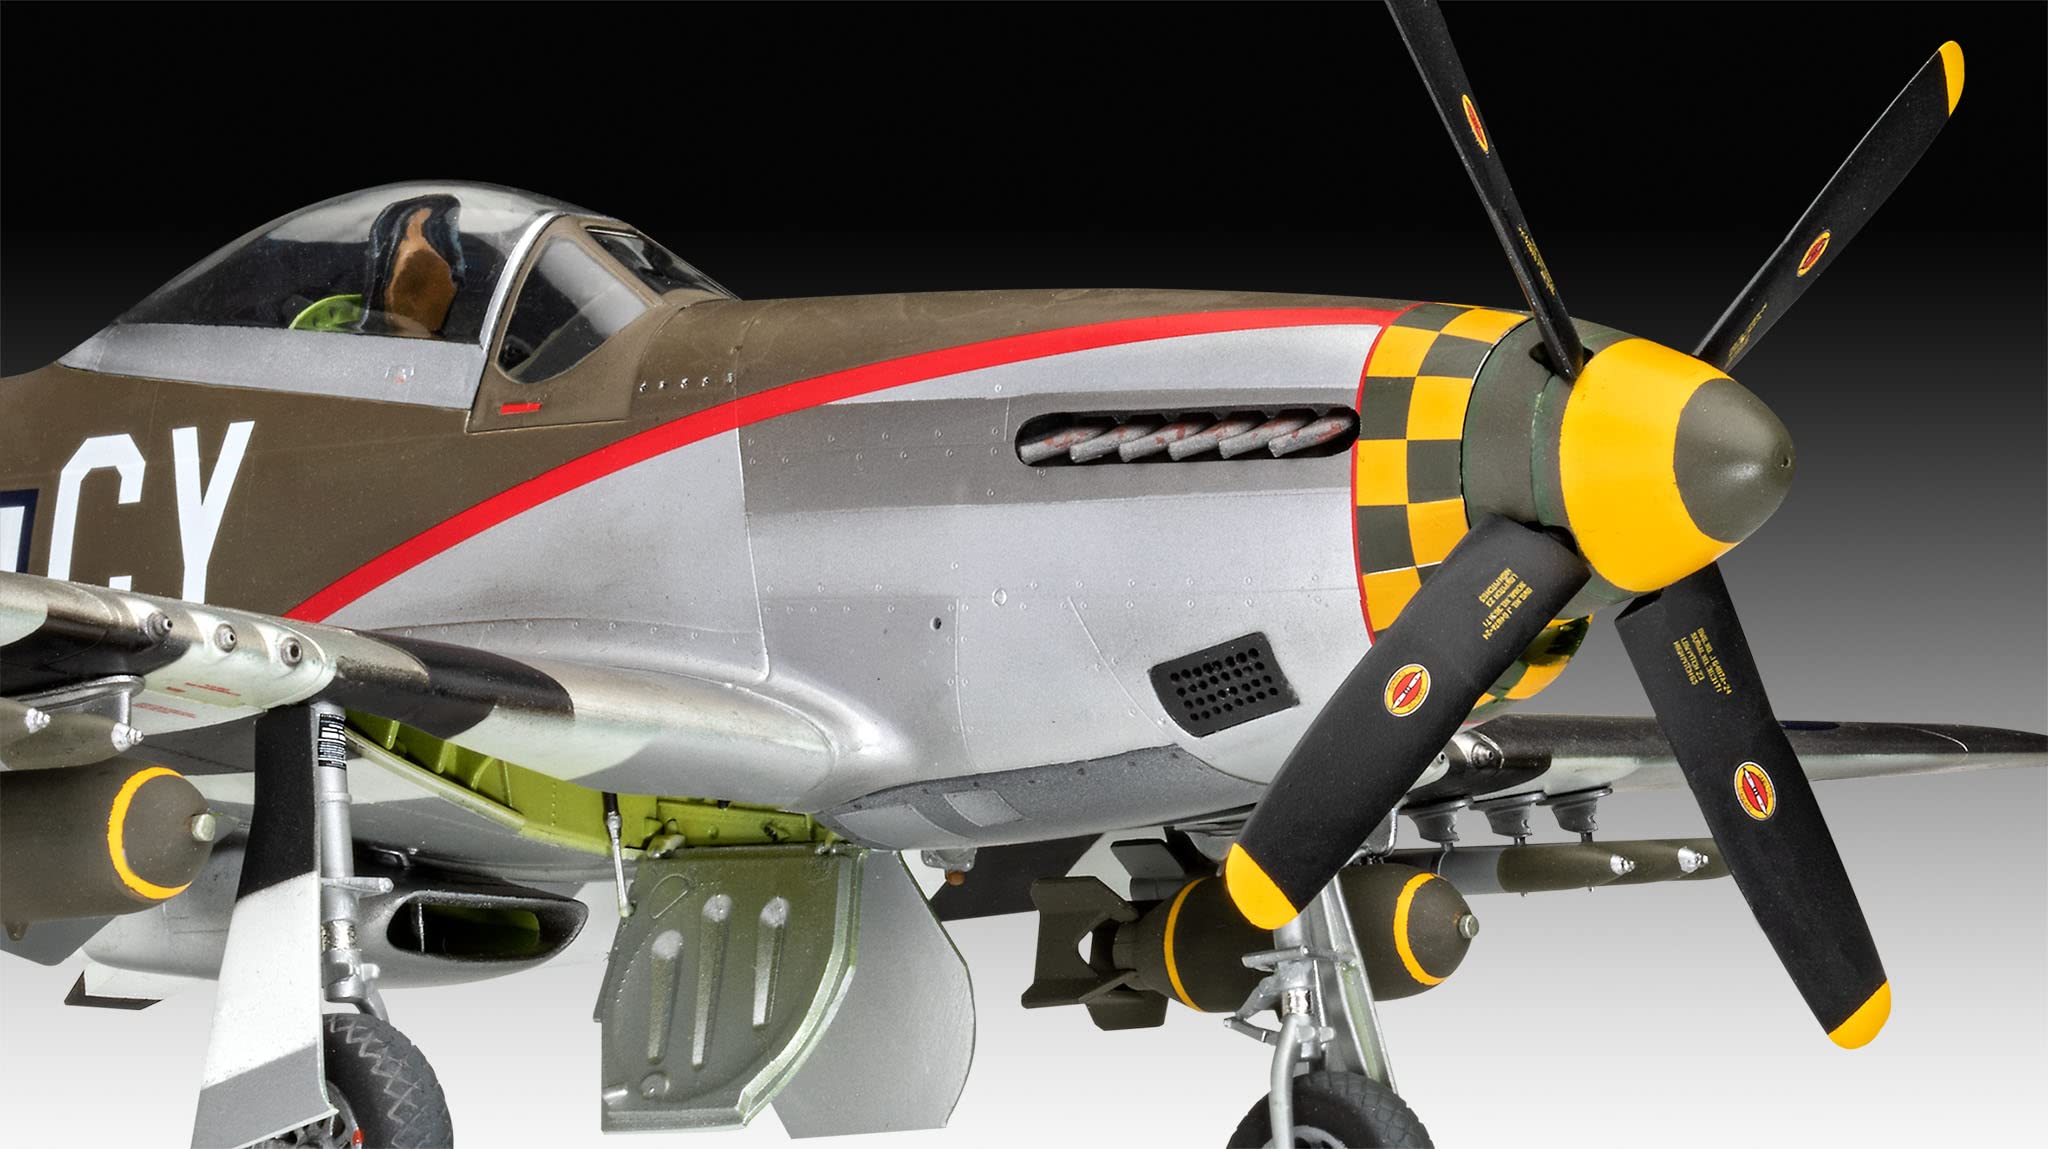 P-51D-15-NA Mustang (late version) 1:32 Scale Kit